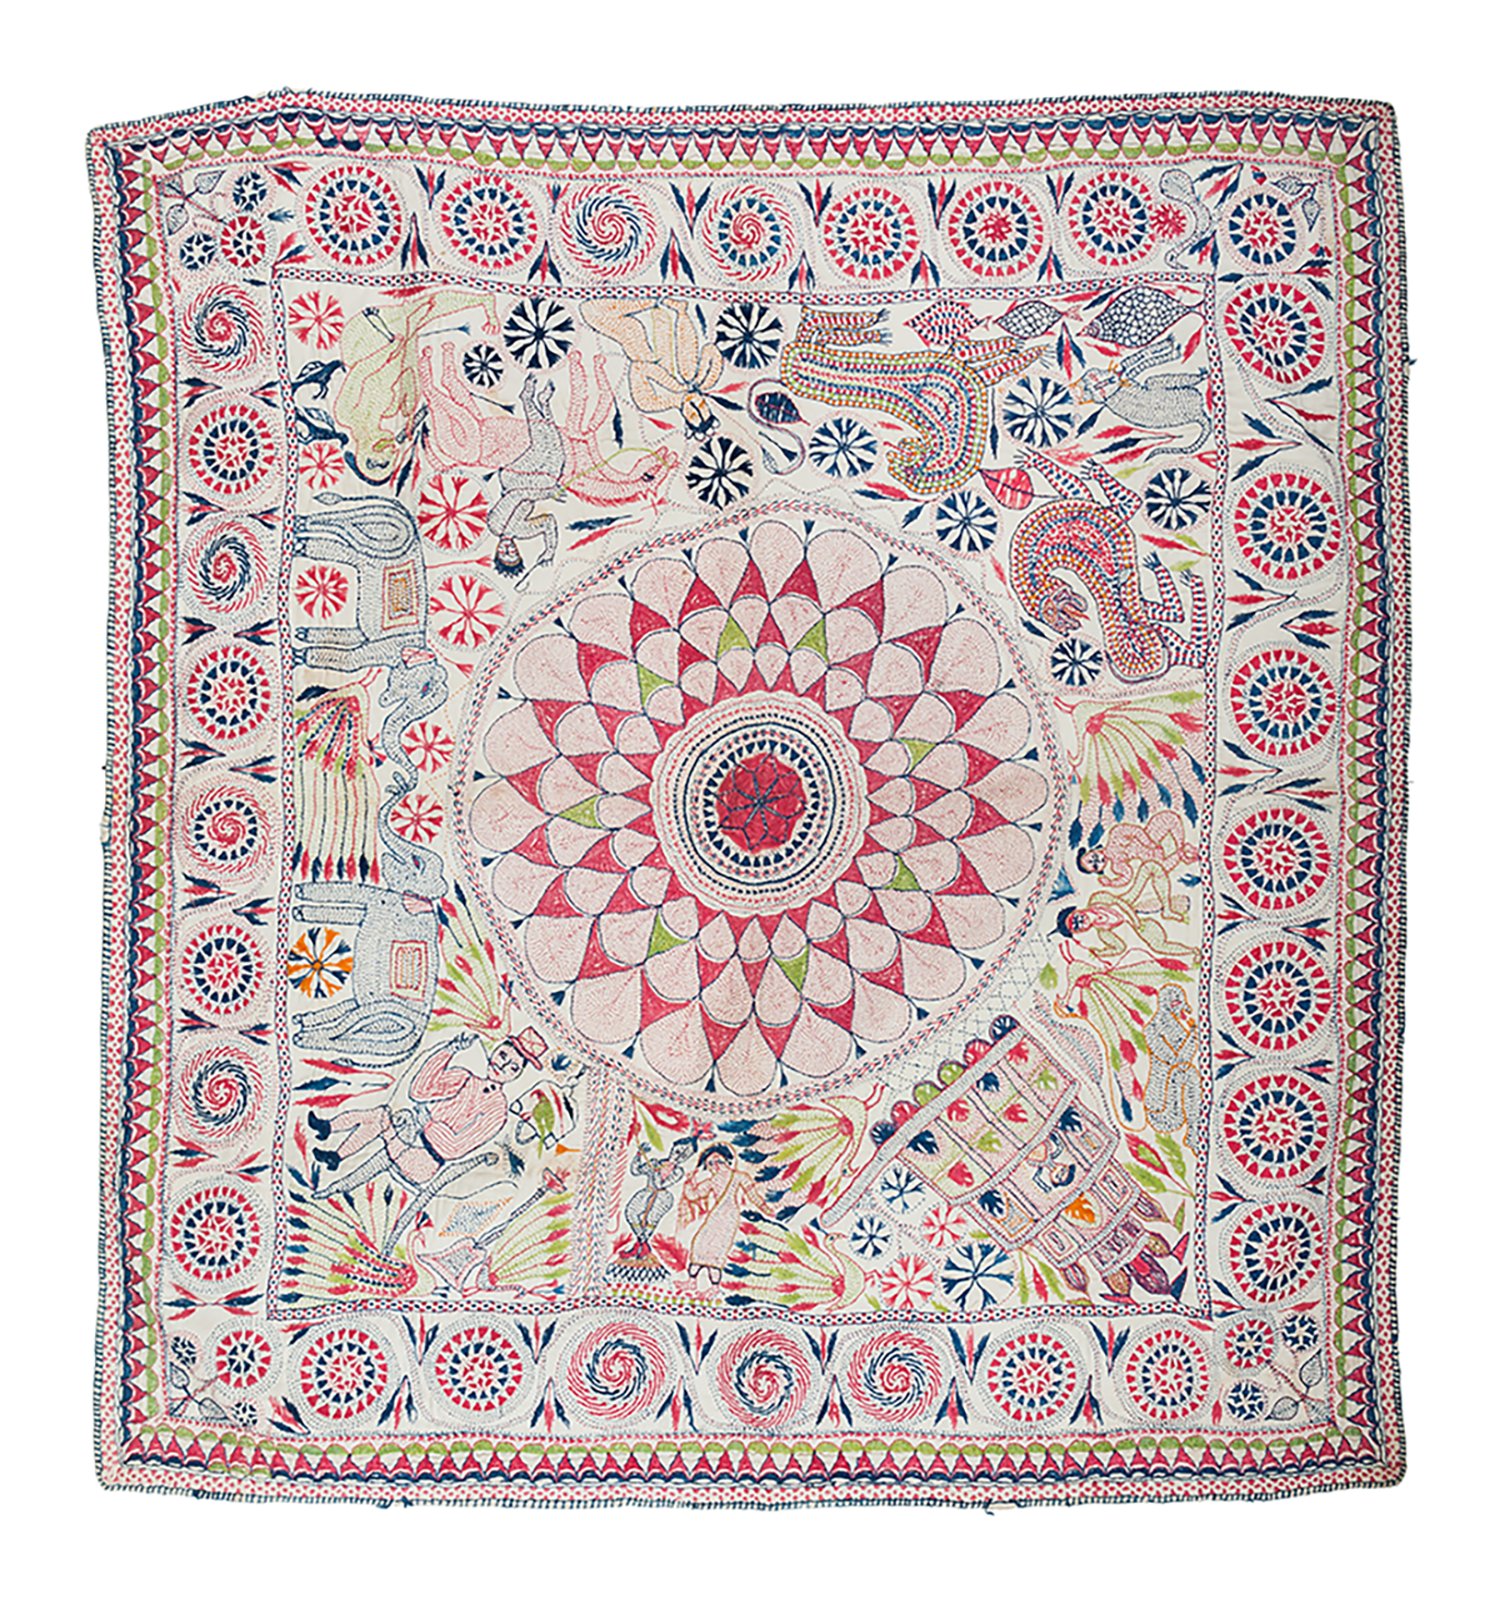 Kantha with a many-petalled lotus in the centre, surrounded by human and animal forms. Circles and flowers form the border.